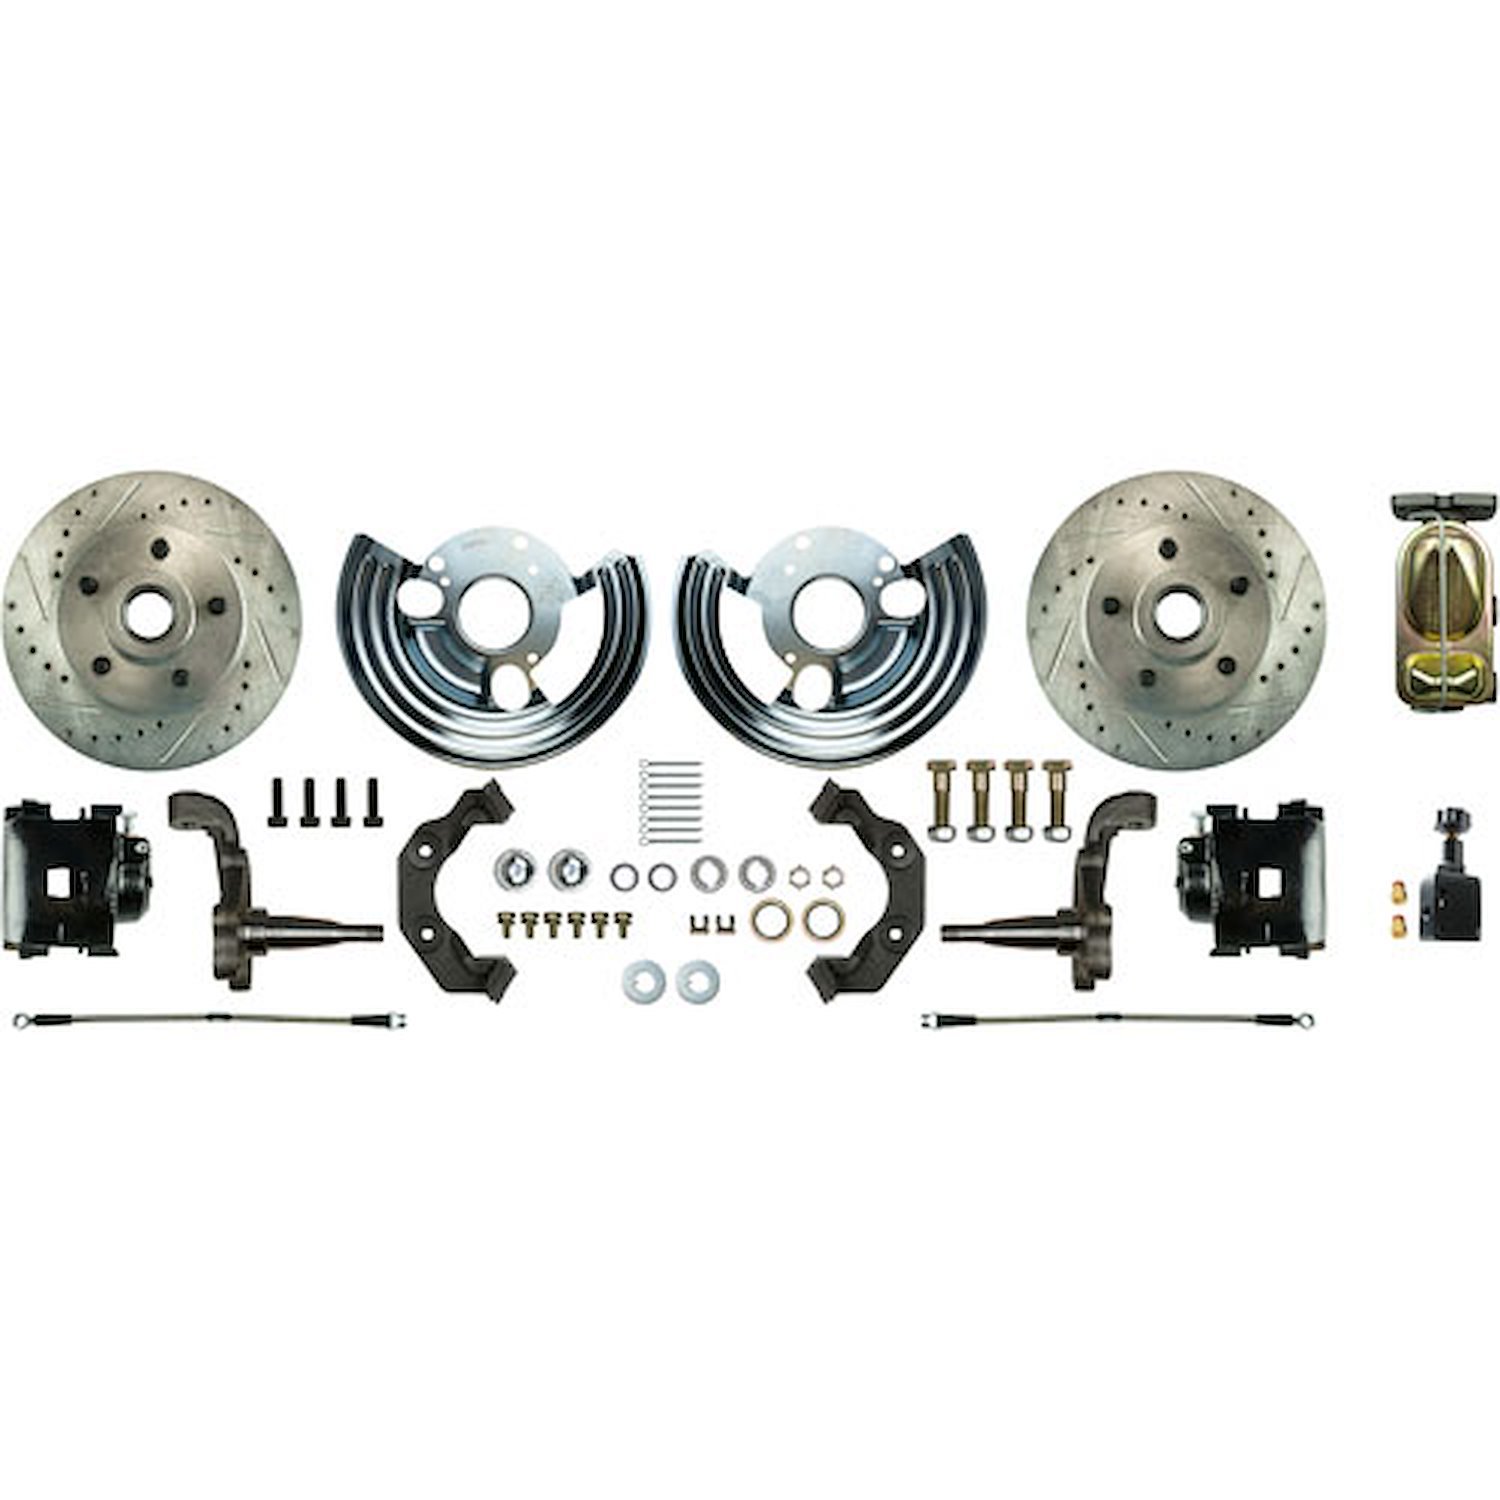 62 - 72 B/E Body Mopar Standard Disc Conversion with Drilled / Slotted / Zinc plated rotors Black Po